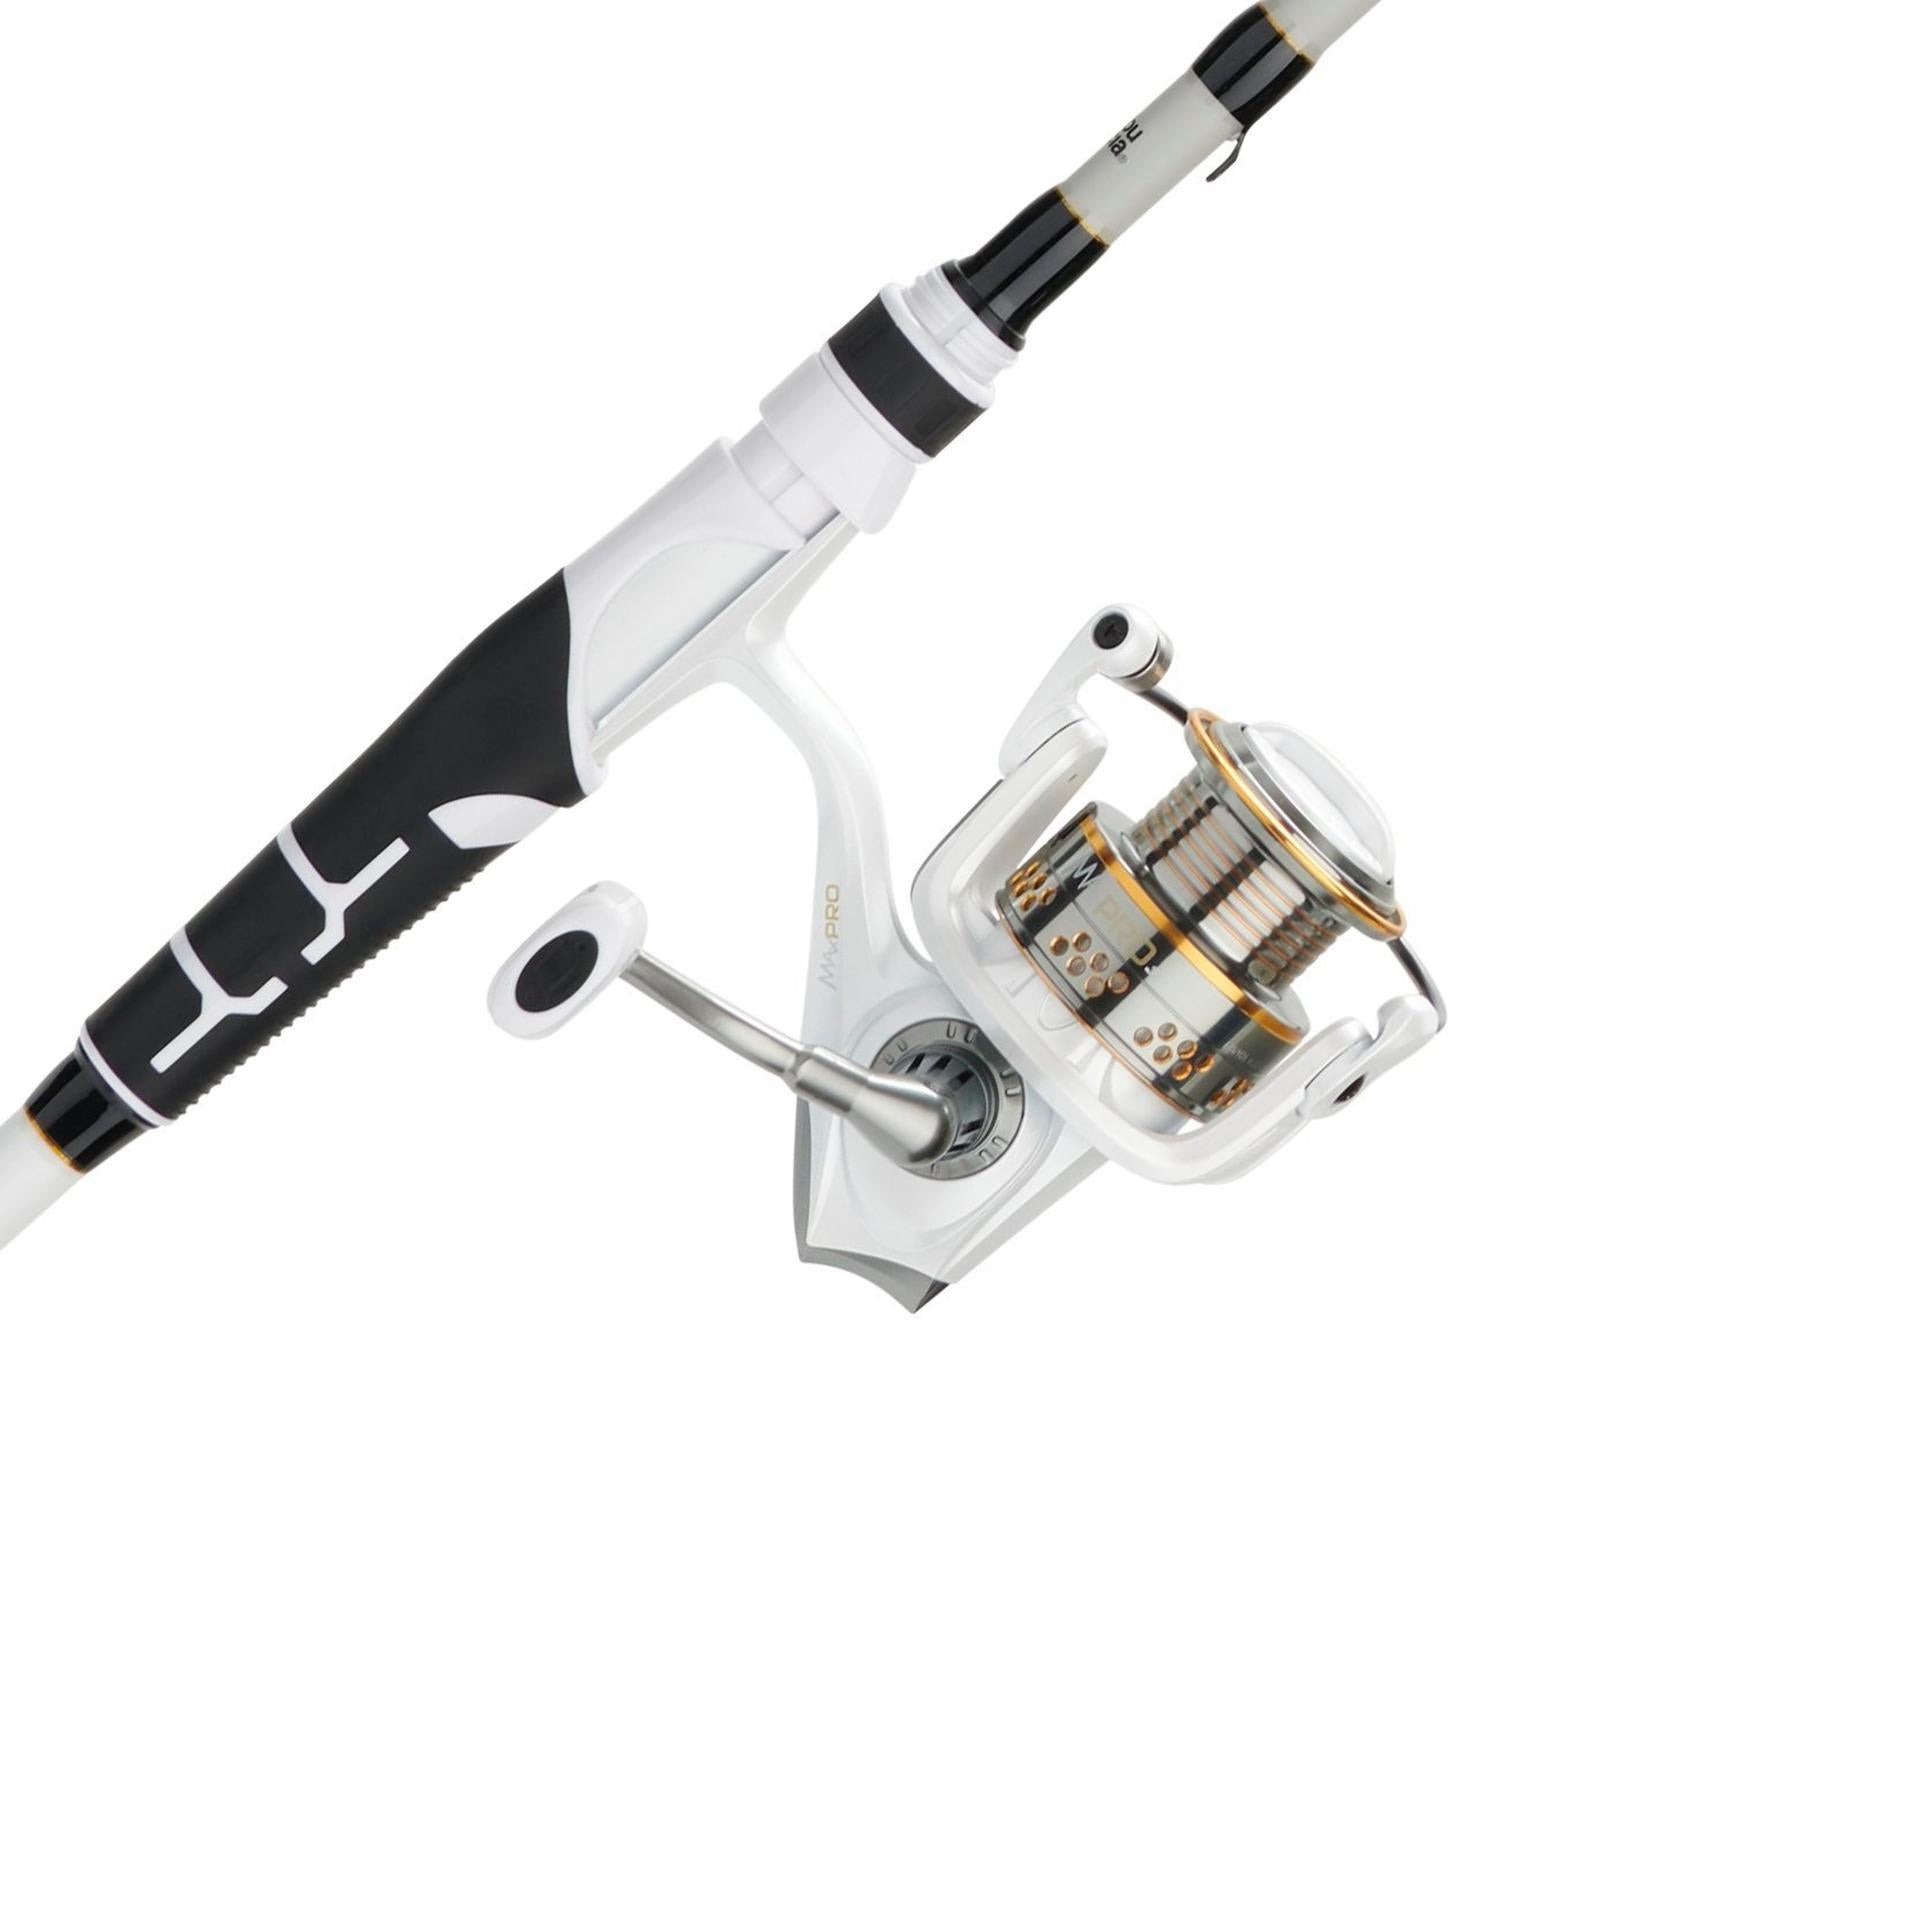 Abu Garcia Max® Pro Spinning Combo with Bait Pack